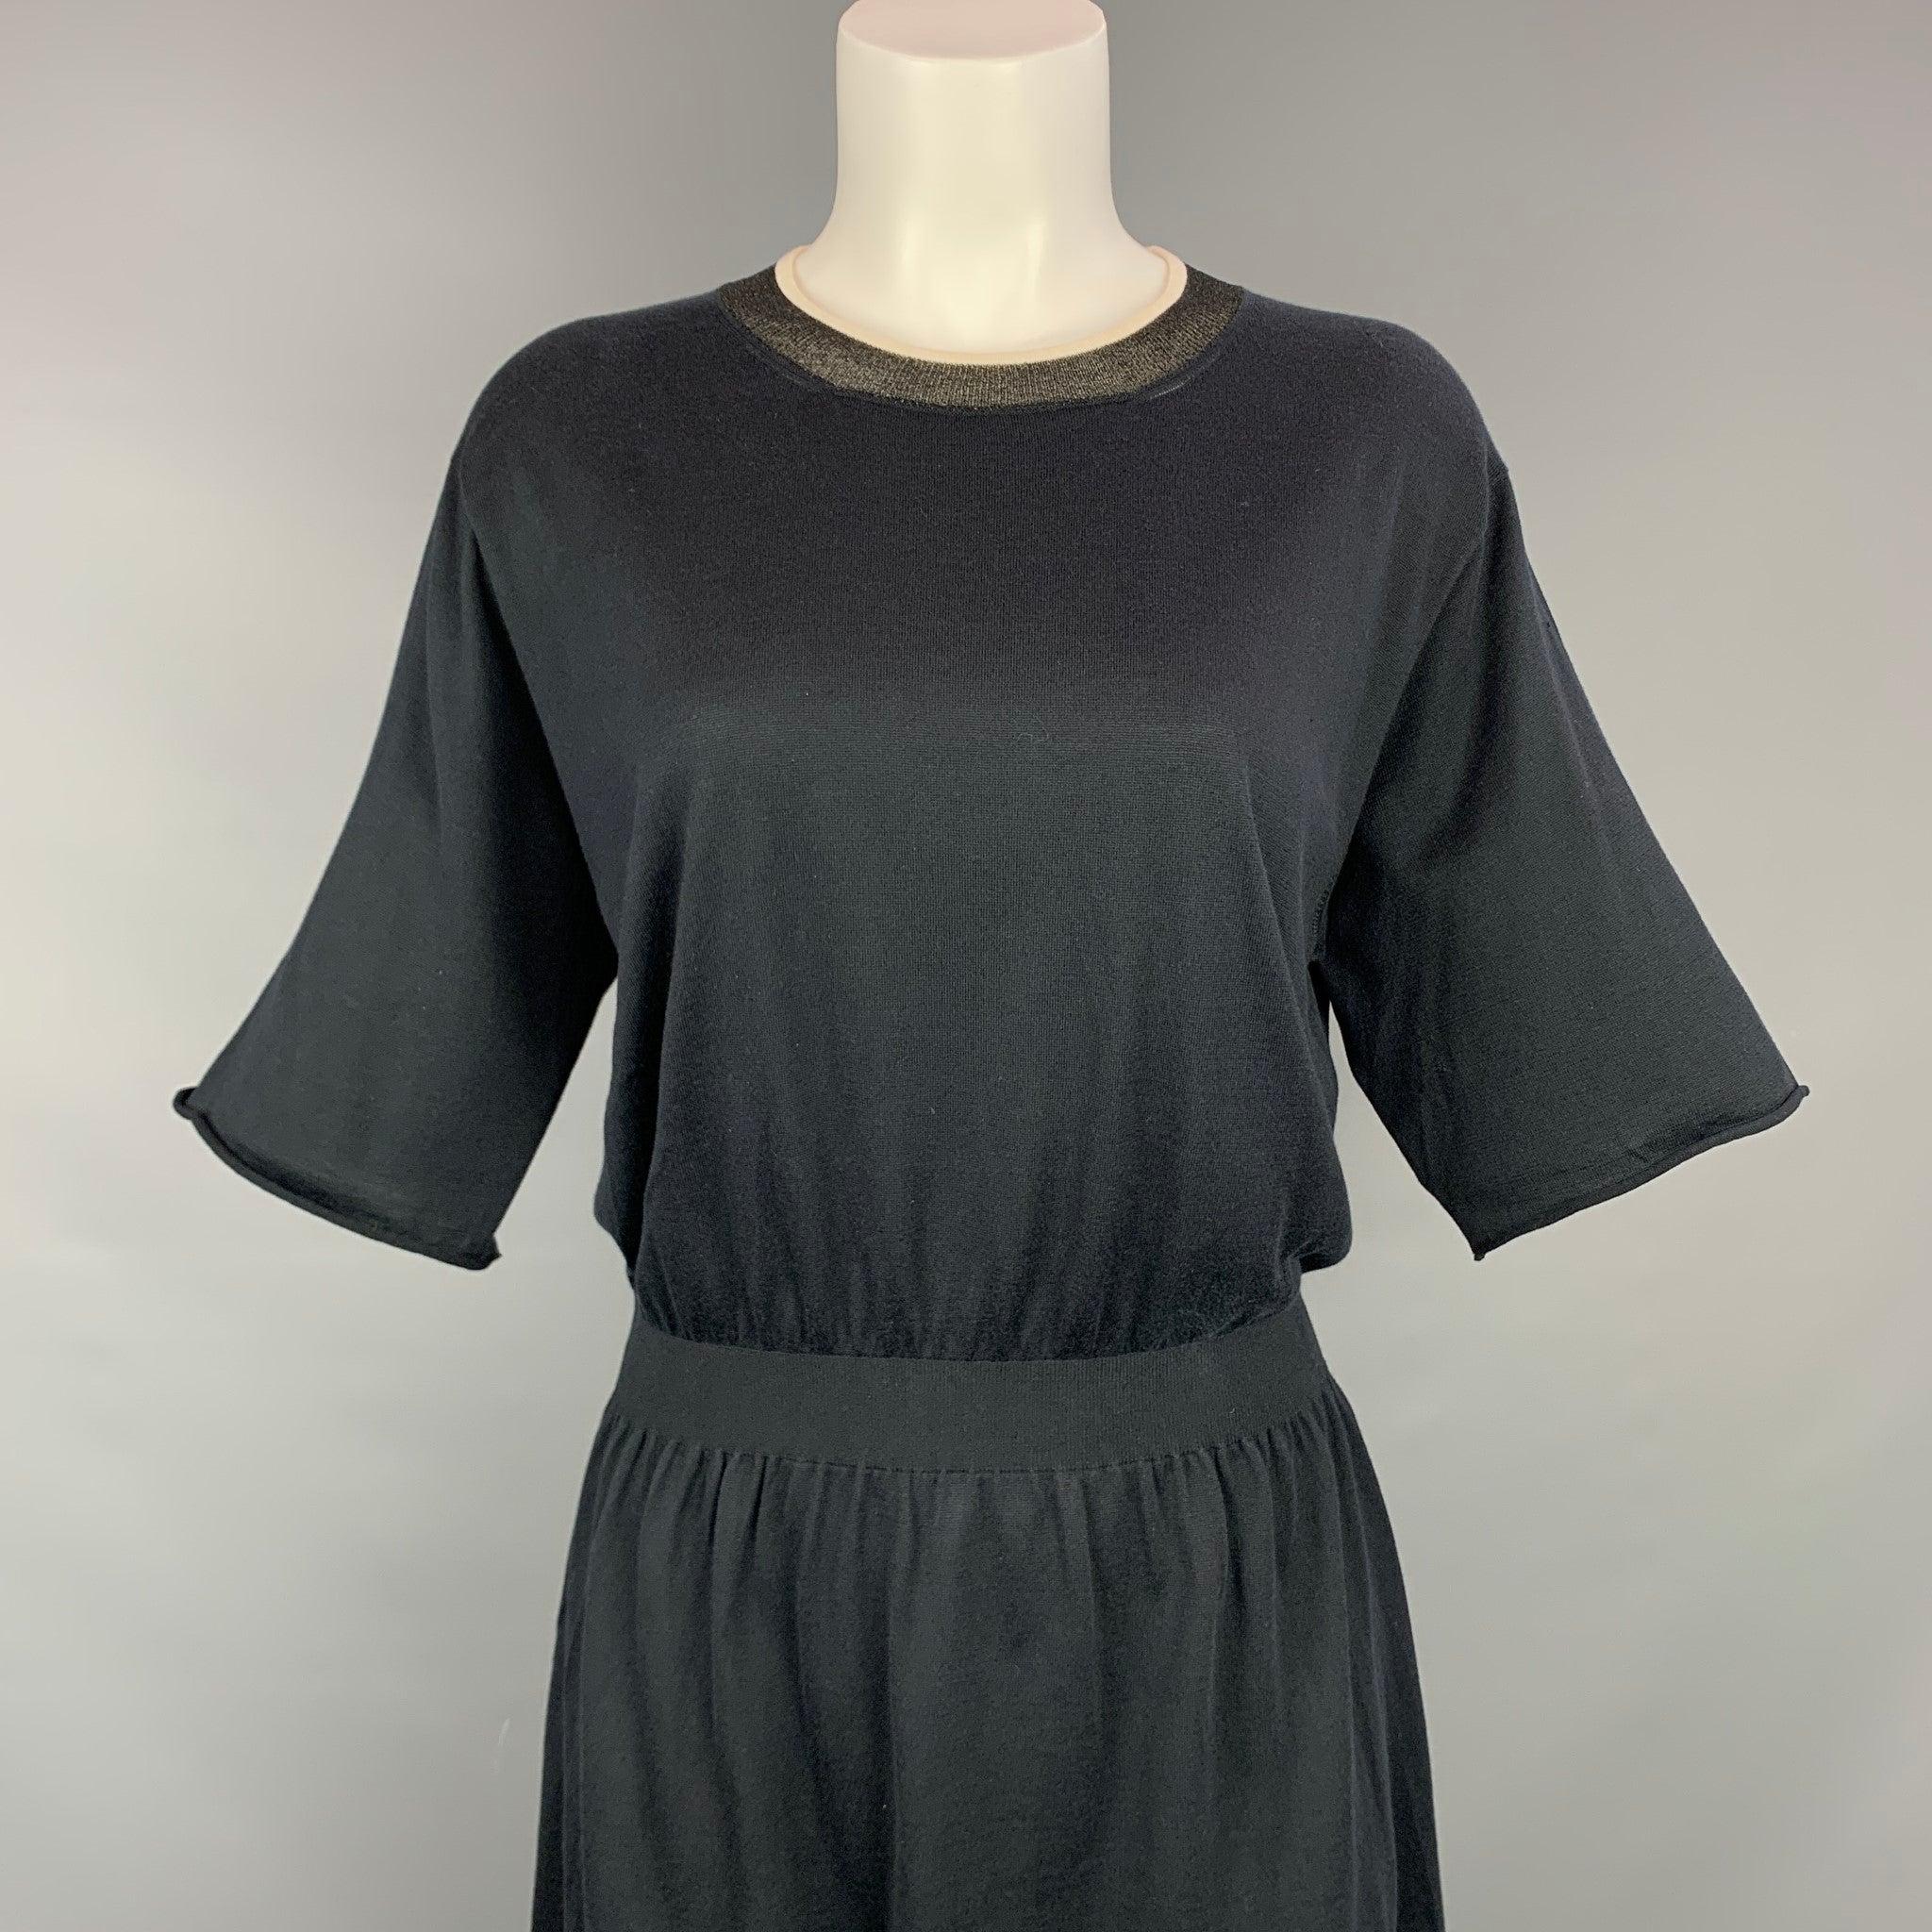 LOUIS VUITTON dress comes in a black knitted silk / cotton featuring a elastic waist, ribbed hem, short sleeves, and a crew-neck. Made in Italy.New With Tags.  

Marked:   L 

Measurements: 
 
Shoulder: 17 inches  Bust: 36 inches  Waist: 28 inches 